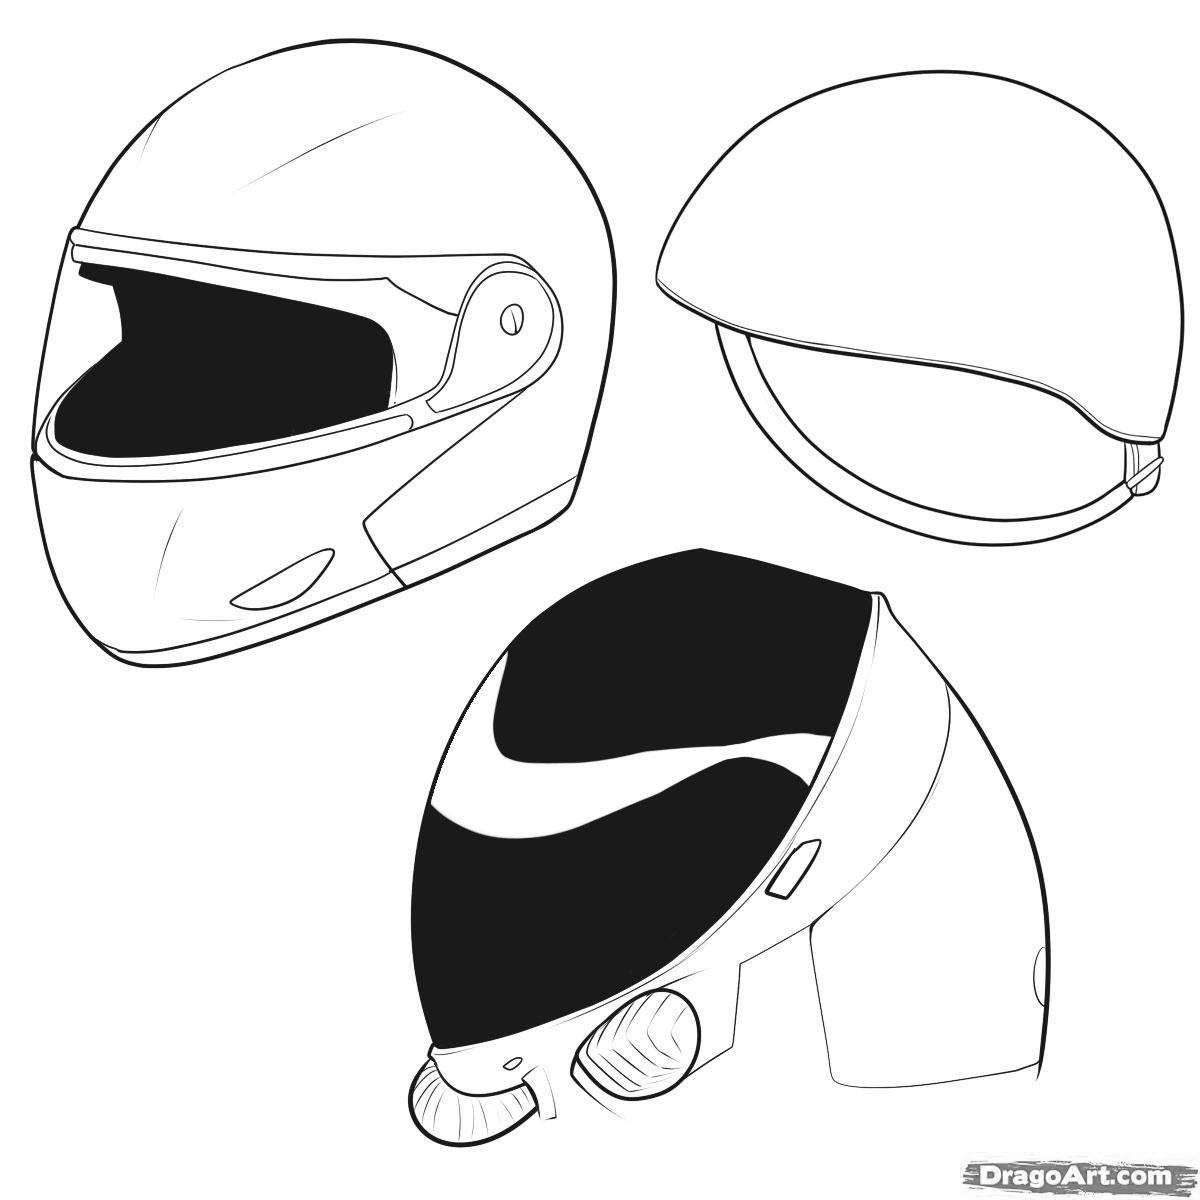 Coloring page of an attractive motorcycle helmet